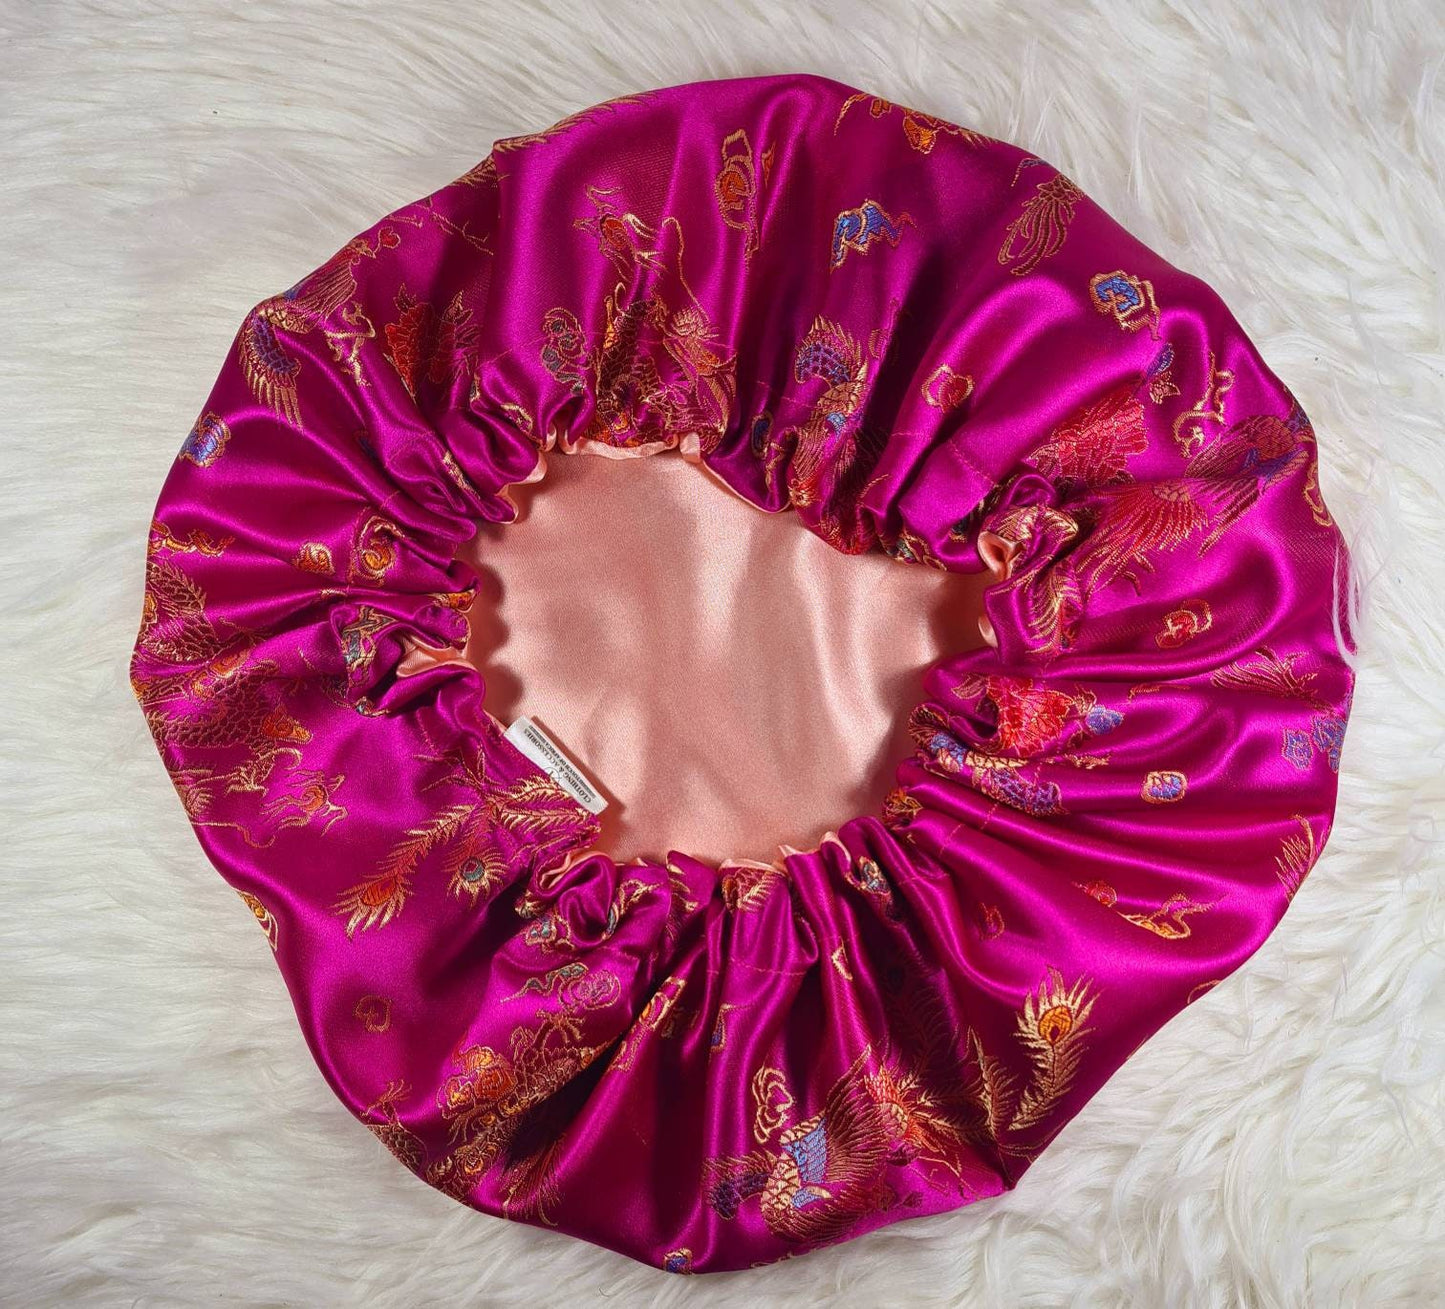 Cerise Pink Chinese Print Satin Bonnet| Limited Edition